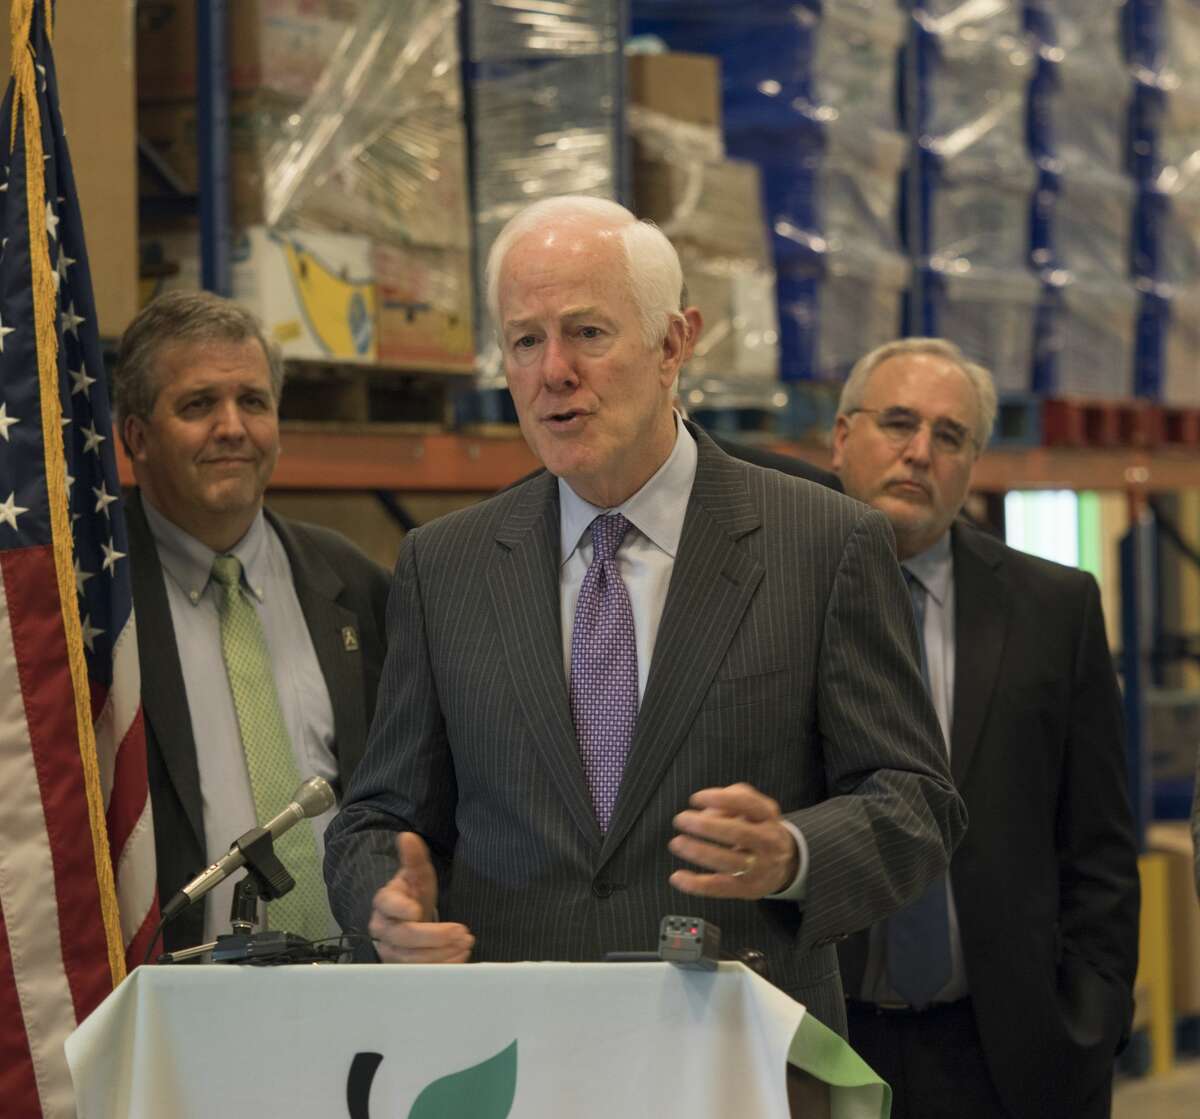 Senator John Cornyn speaks 04-18-17 at the Midland West Texas Food Bank about new legislation to reduce food insecurity and poverty. Tim Fischer/Reporter-Telegram